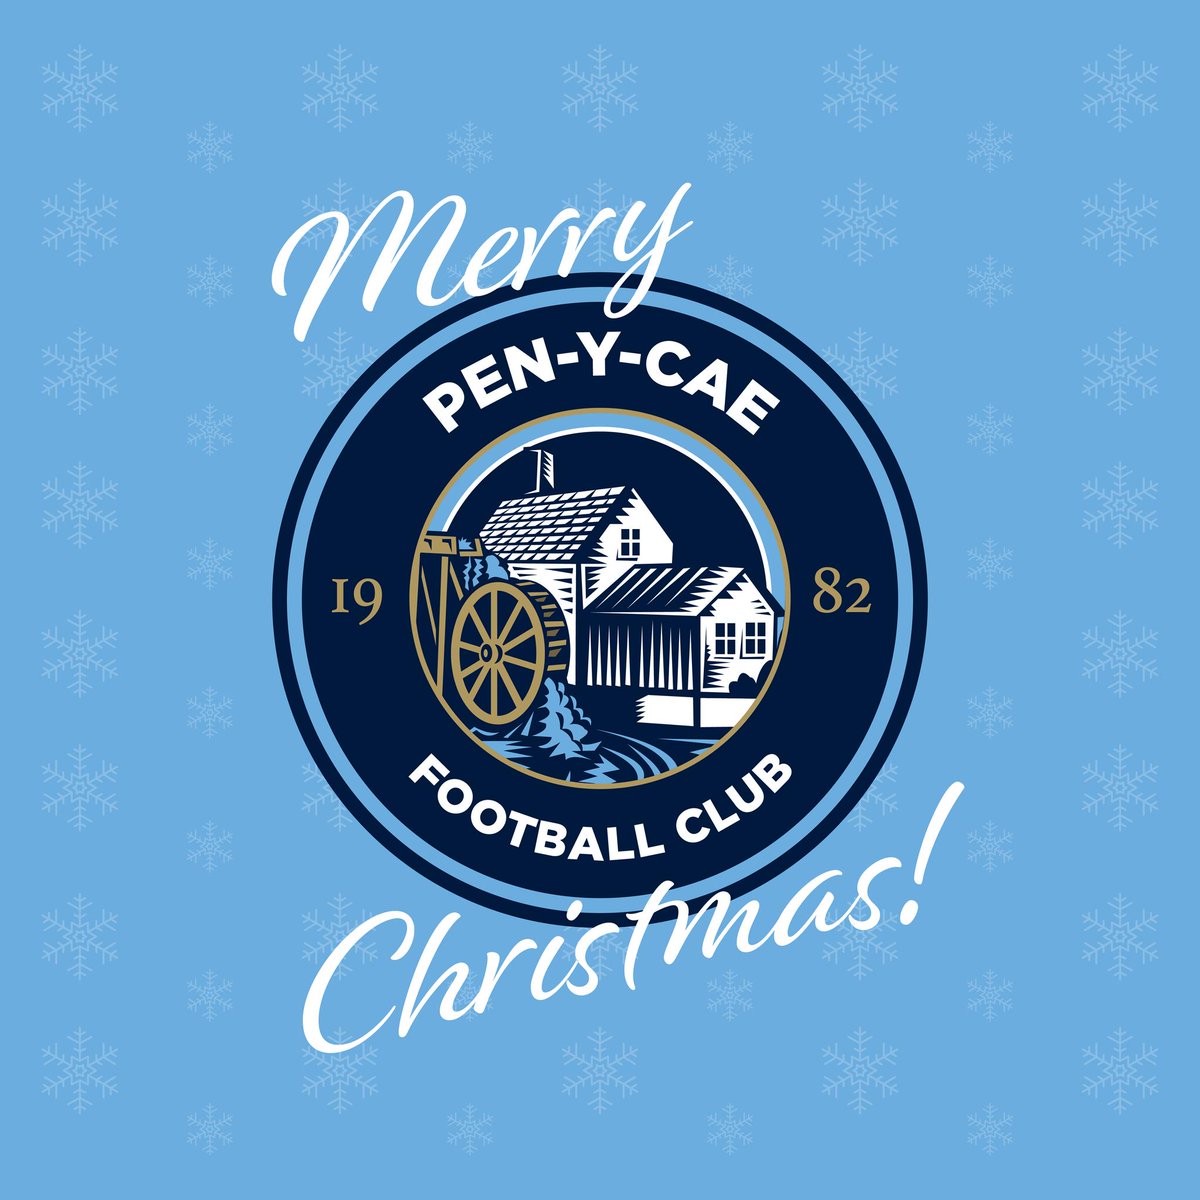 🎄𝐌𝐞𝐫𝐫𝐲 𝐂𝐡𝐫𝐢𝐬𝐭𝐦𝐚𝐬 🎄 
Penycae Football Club would like to wish all our Managers, Coaches, Players, Parents, Staff, Supporters and Sponsors a Merry Christmas and a Happy New Year.

💙 Our Crest, Our Club, Our Community, Our Cae 💙

#MoreThanAClub #WeAreTheCae